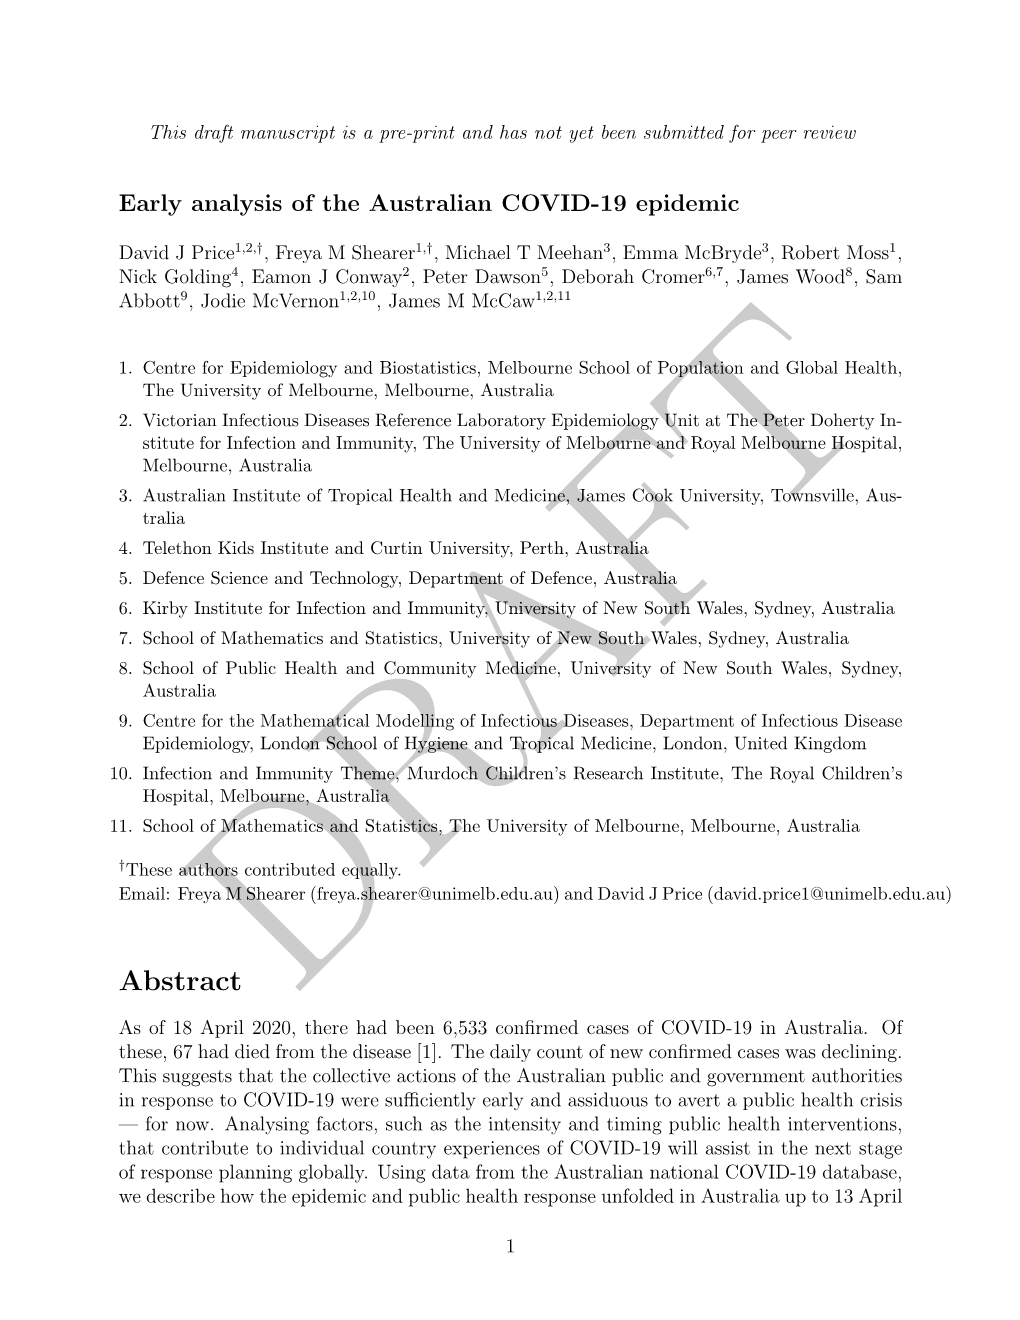 Early Analysis of the Australian COVID-19 Epidemic